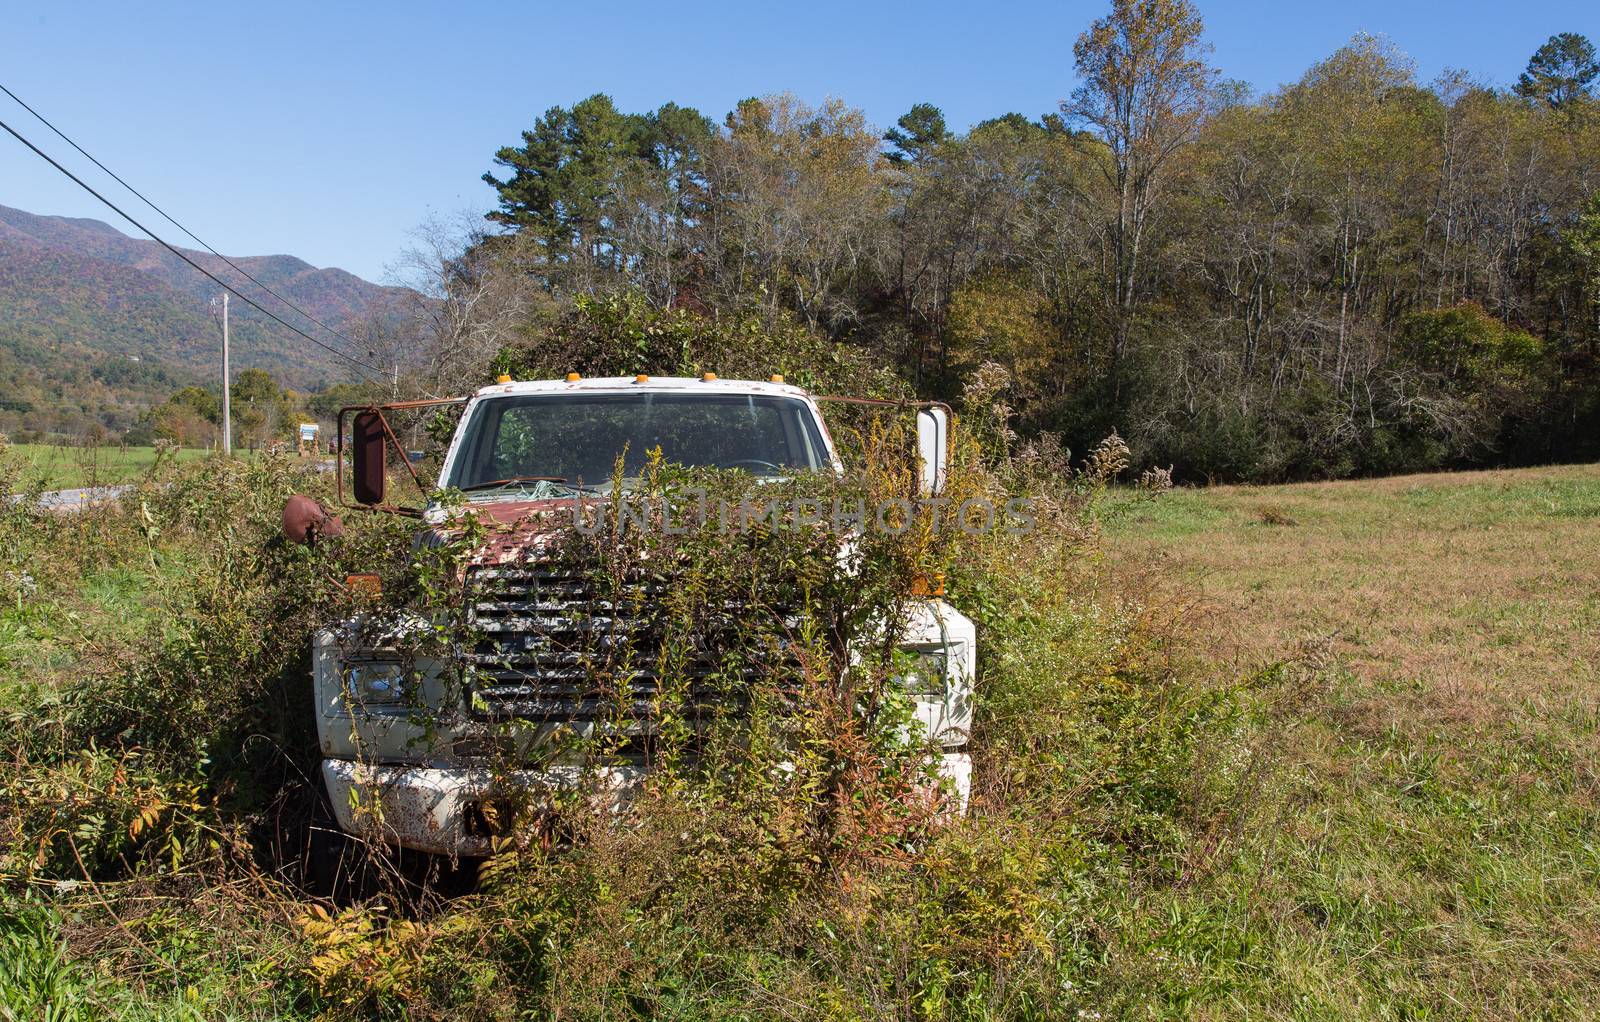 This truck has been parked at this spot so long it is rapidly becoming part of the landscape.